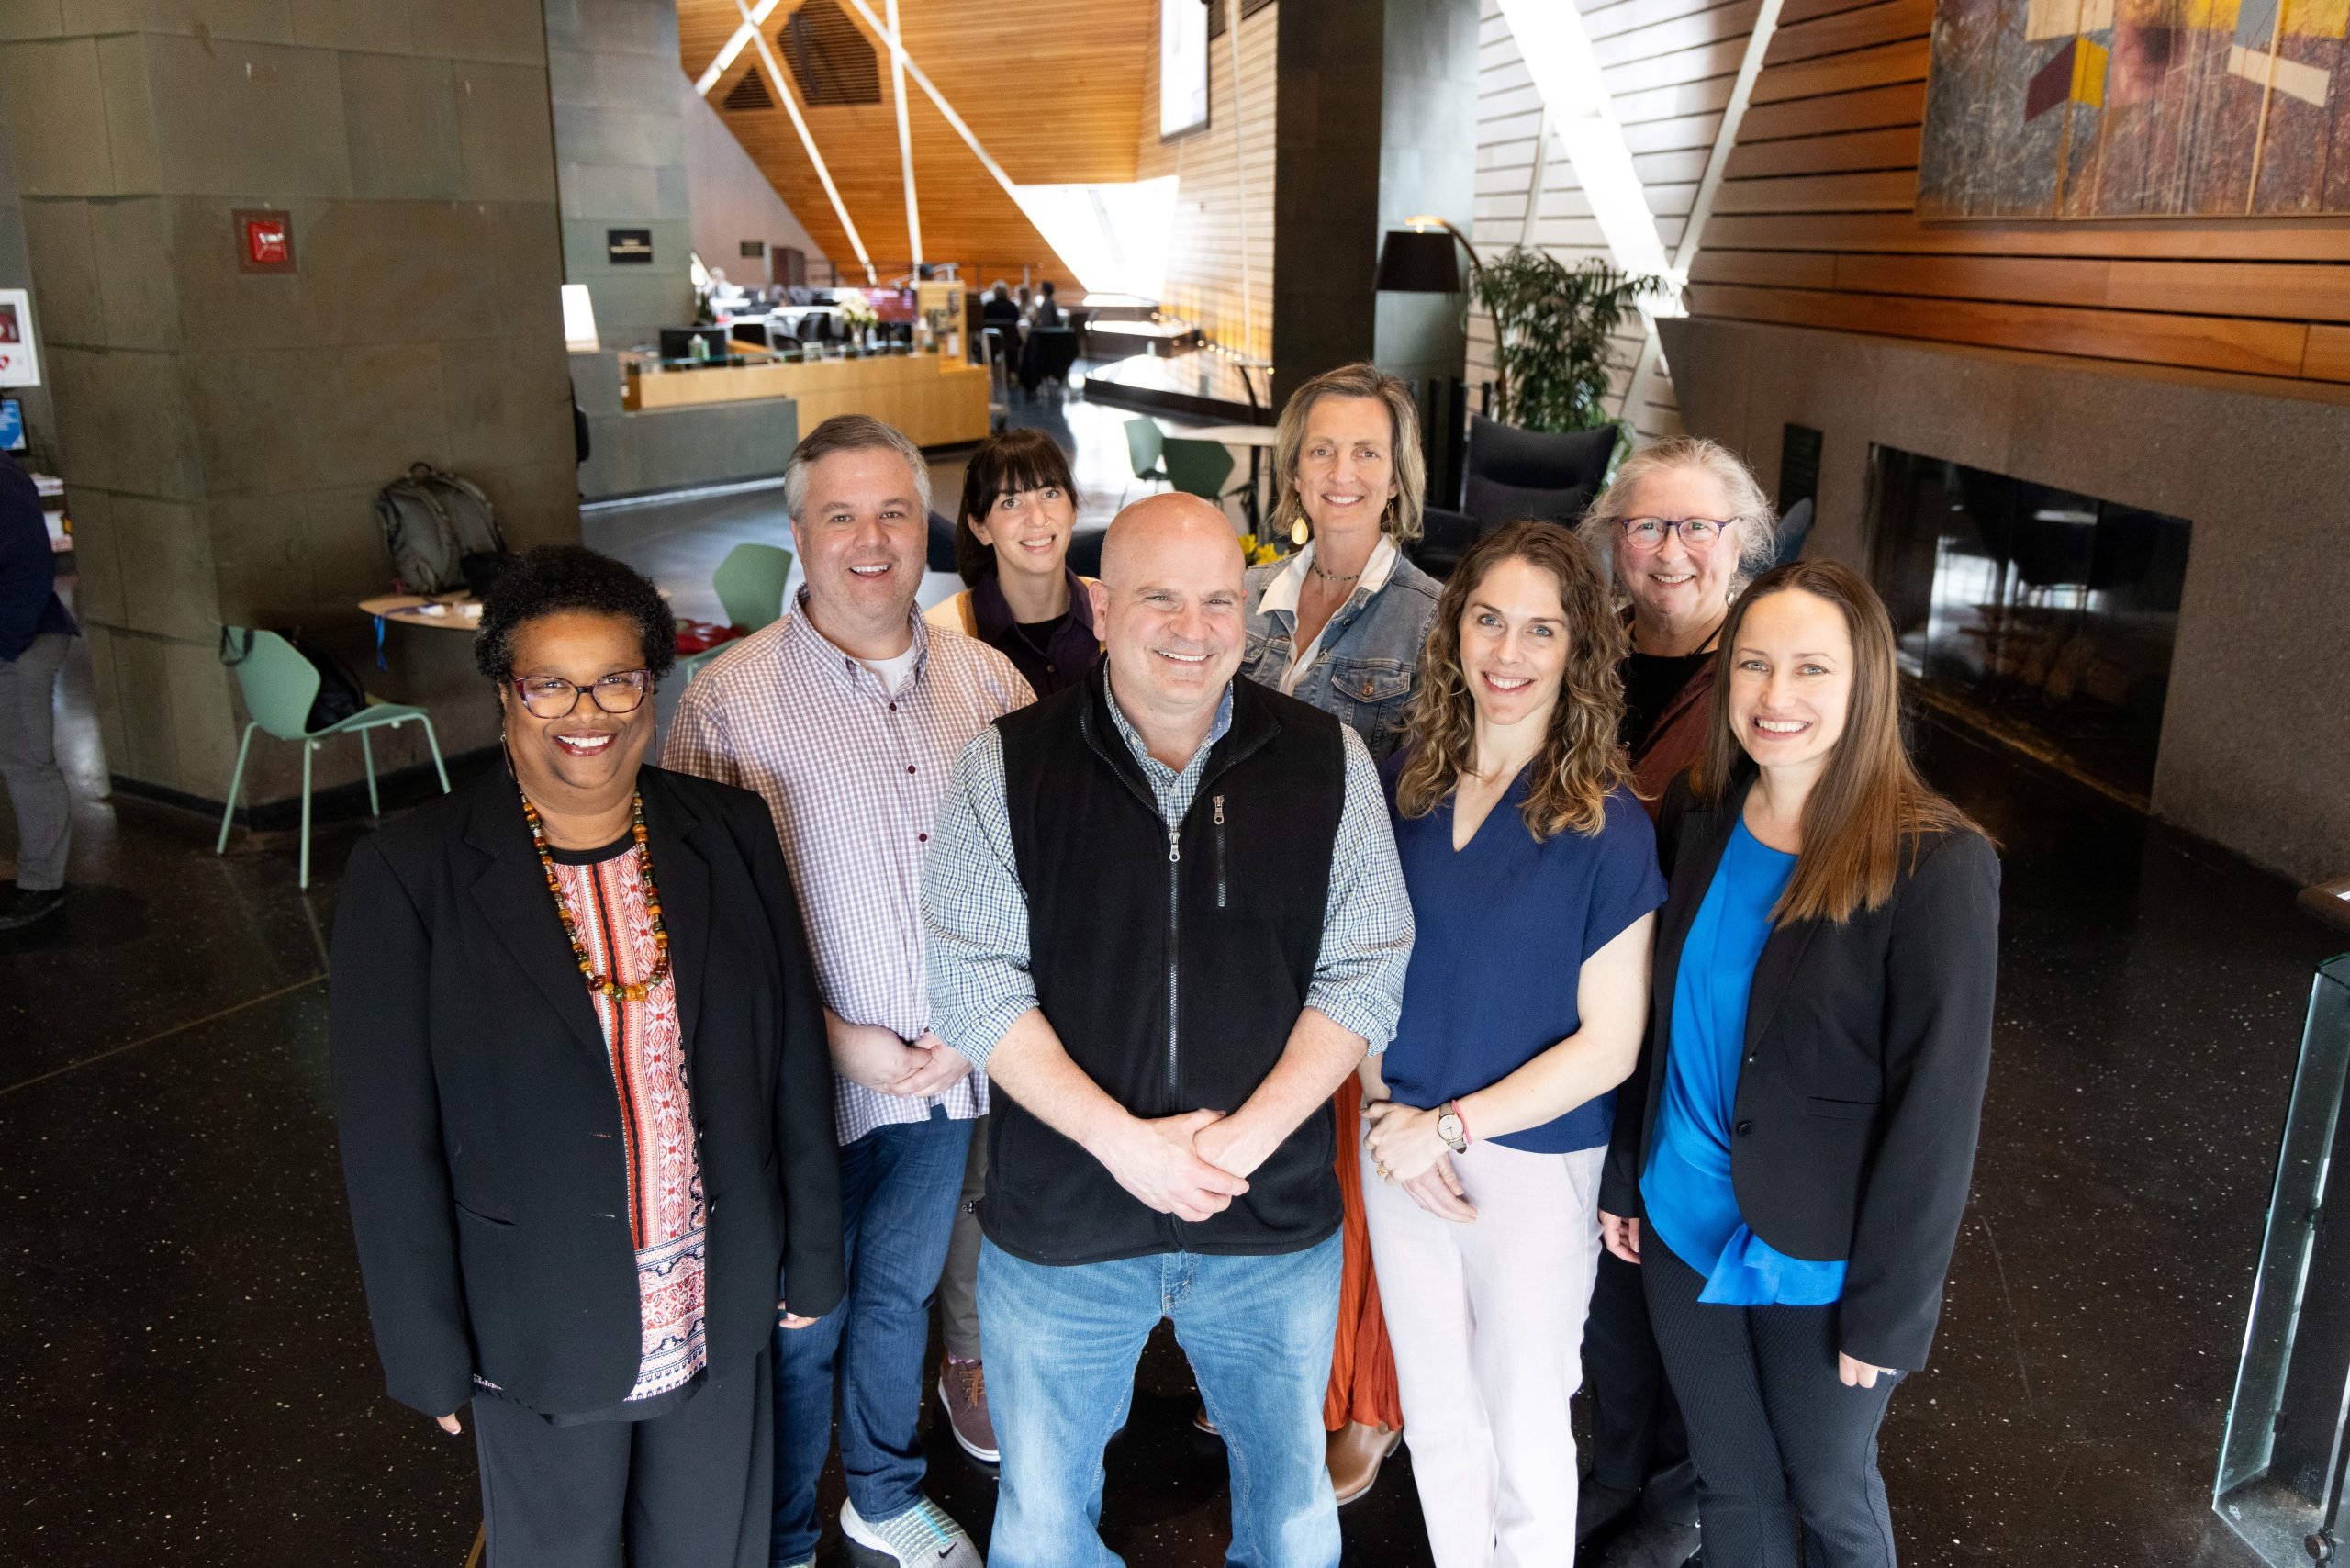 Photo of CHAI Team at the Minnesota Gerontological Society conference. Photographed from left to right: Robbin Frazier, Rajean Moone, Allycia Wolff, Joseph Gaugler, Elma Johnson, Marti DeLiema, Terri Harvath, and Tetyana Shippee